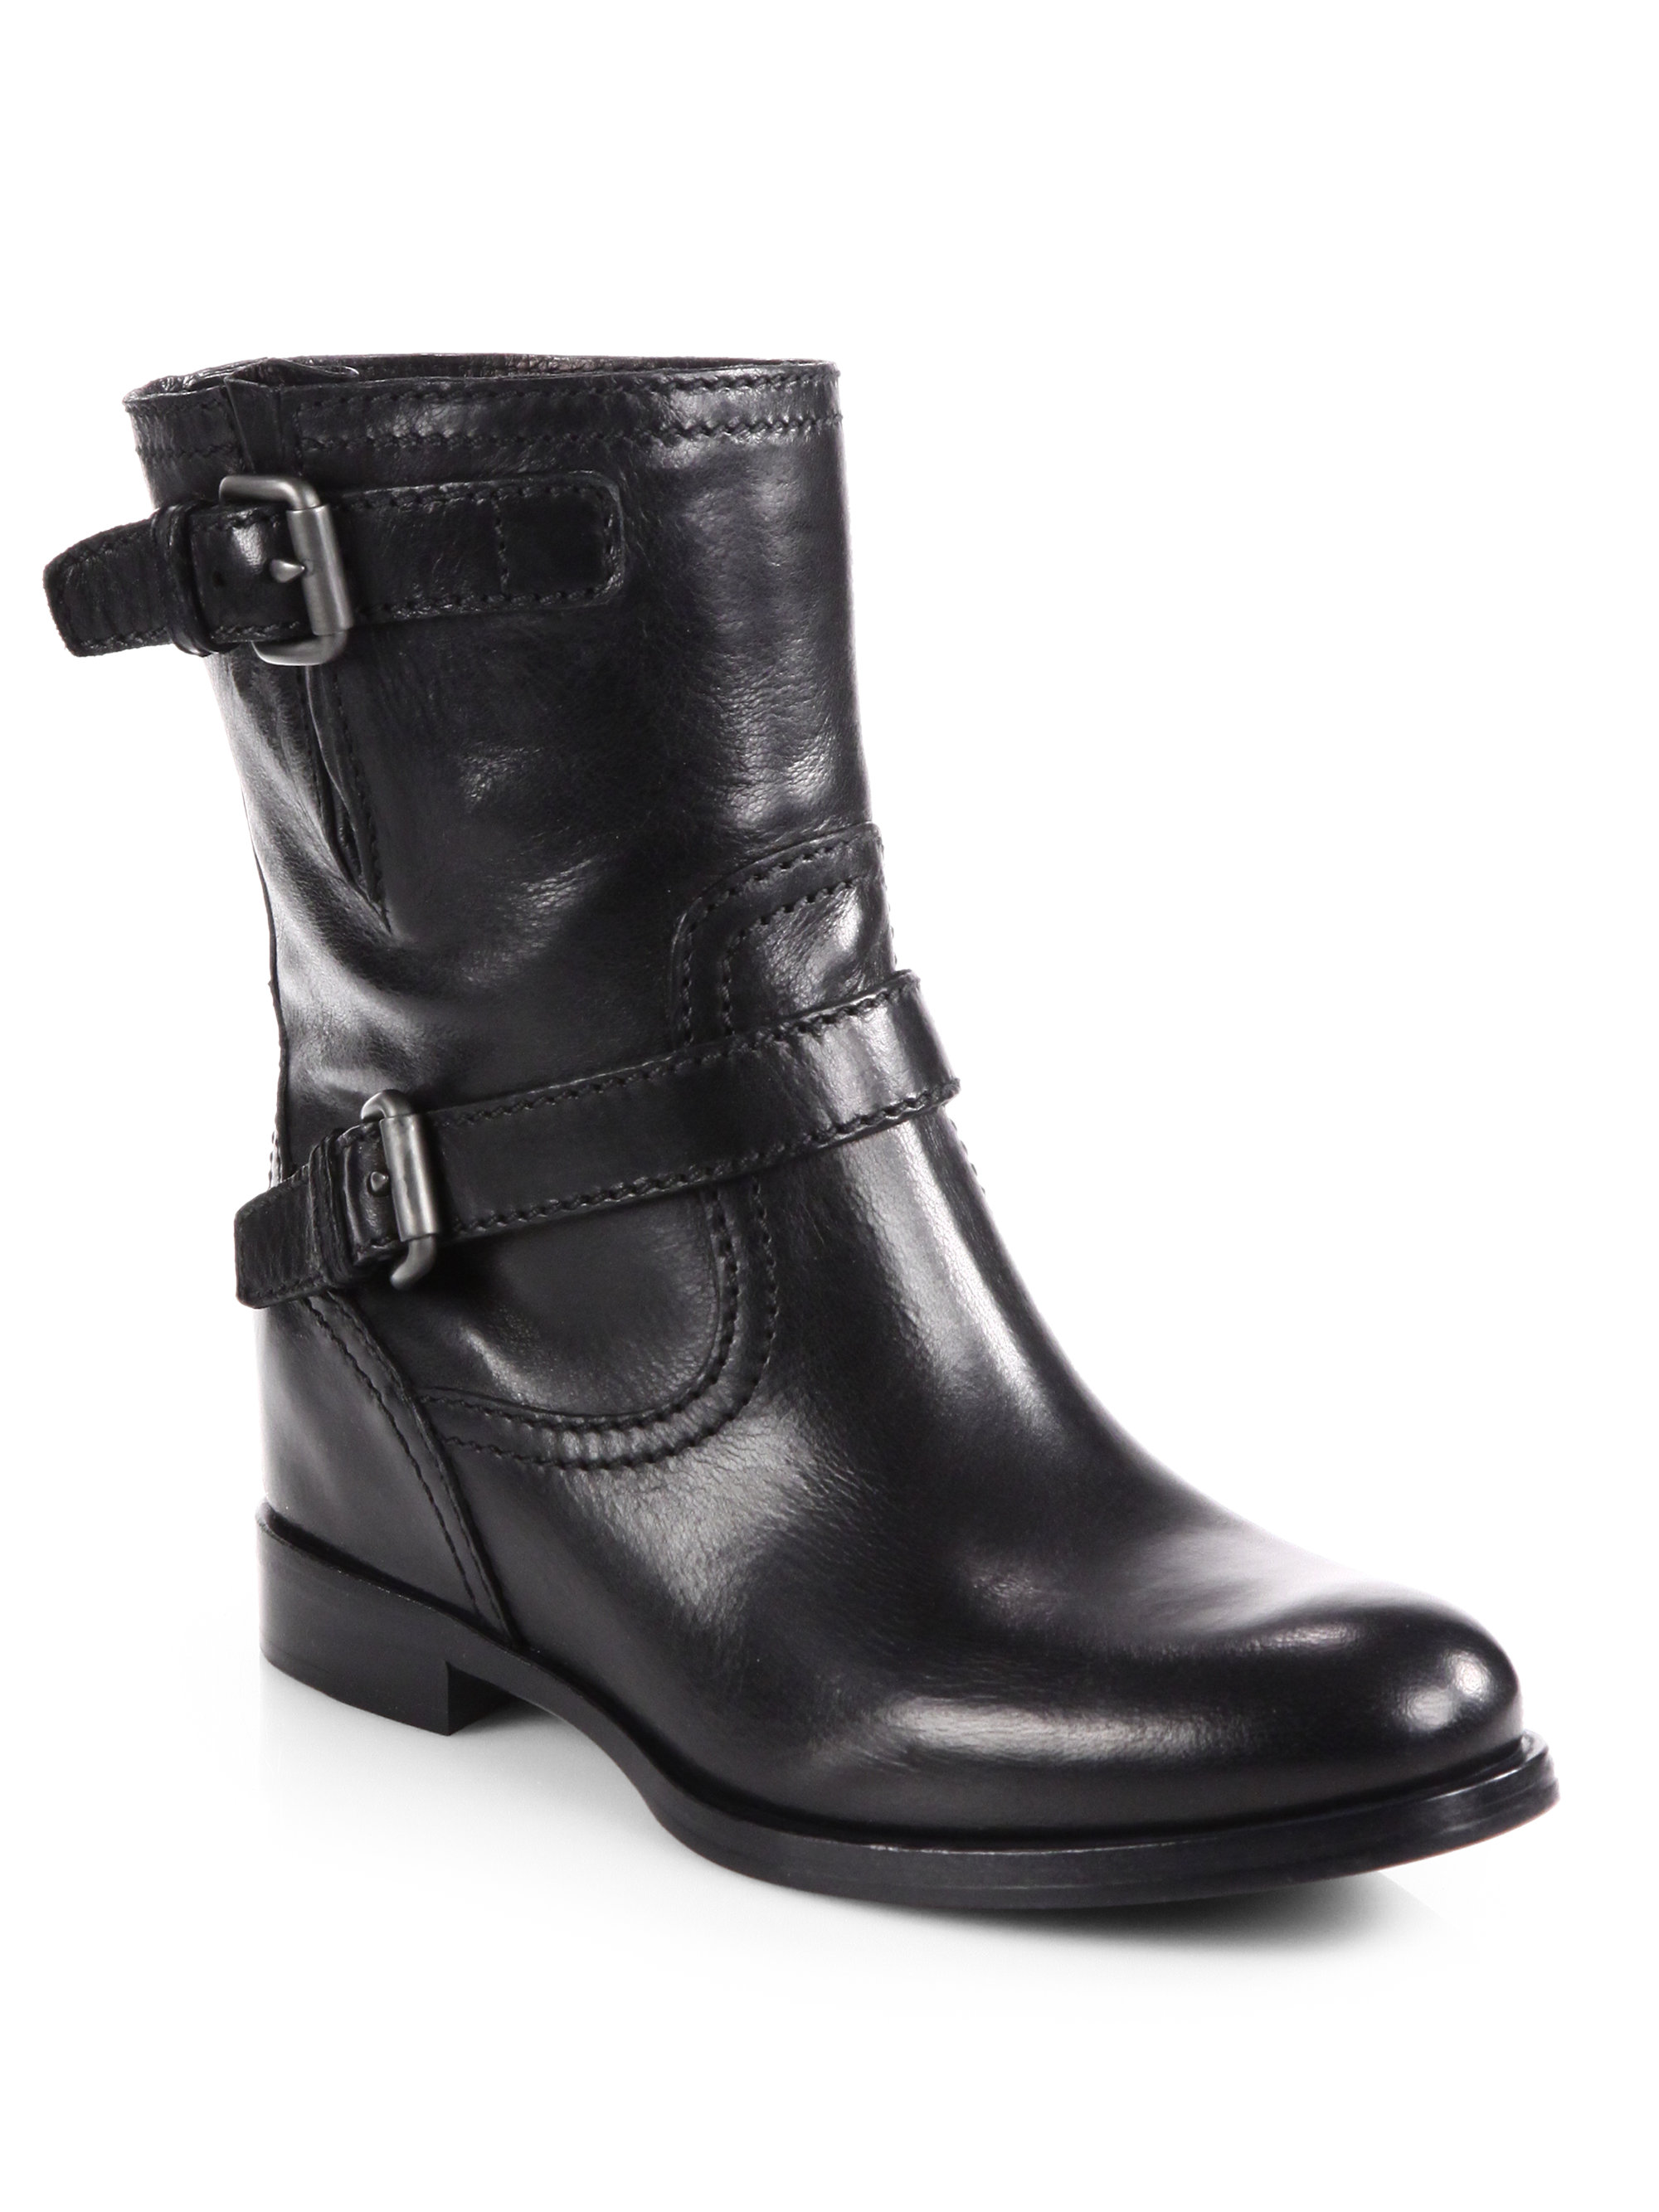 Prada Leather Double Buckle Motorcycle Boots in Black